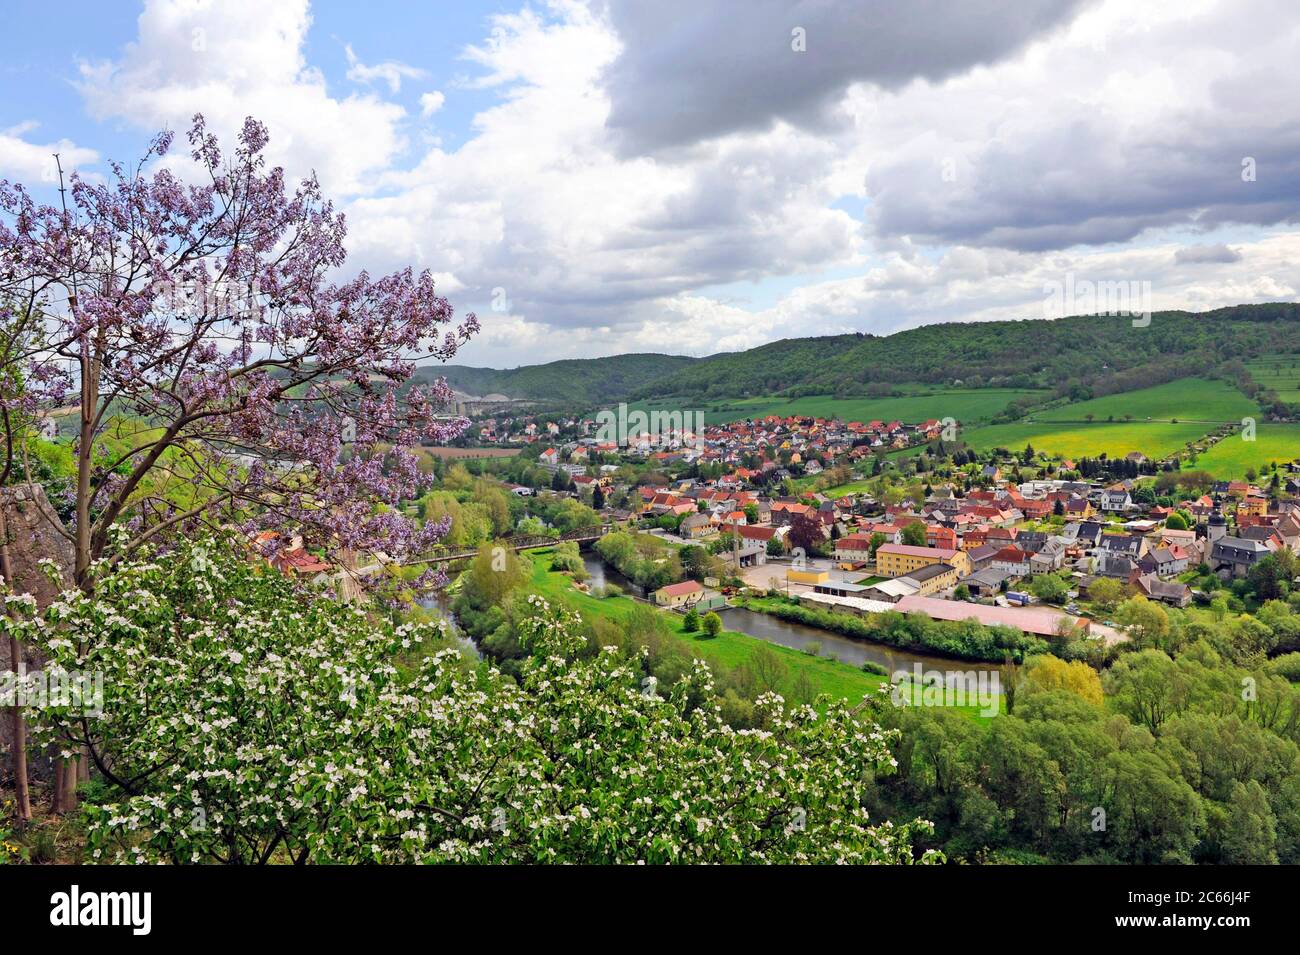 View of the Saale limestone rock and the town of Dornburg from the terraces of the Dornburg castles, view of the wide Saale Valley and the wooded heights of the Thuringian Forest Stock Photo